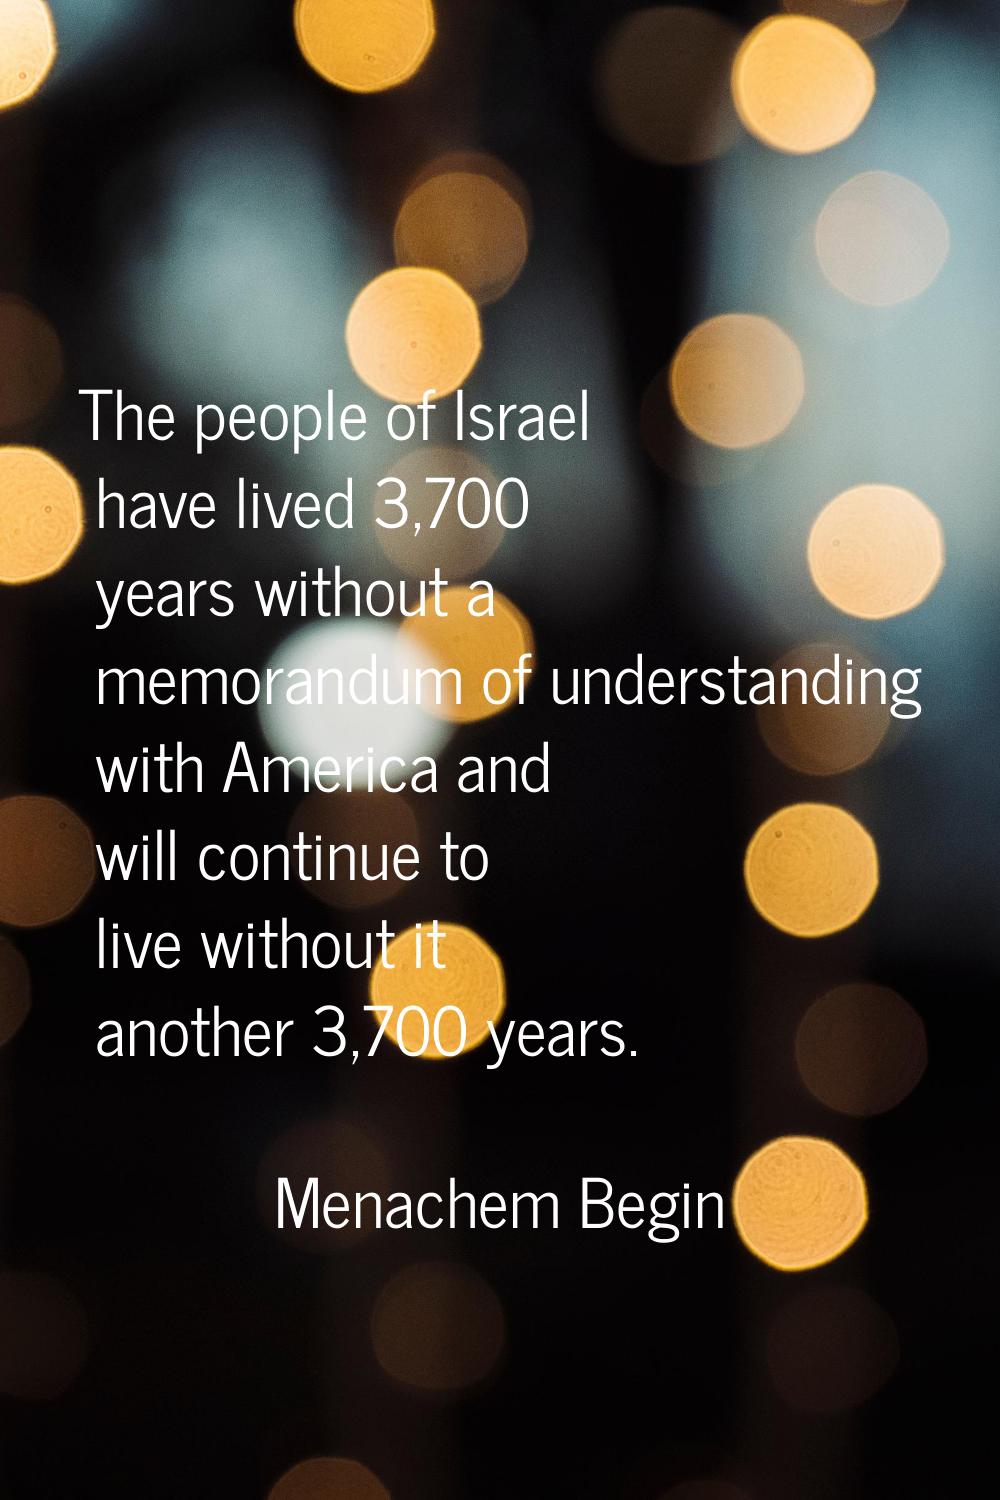 The people of Israel have lived 3,700 years without a memorandum of understanding with America and 